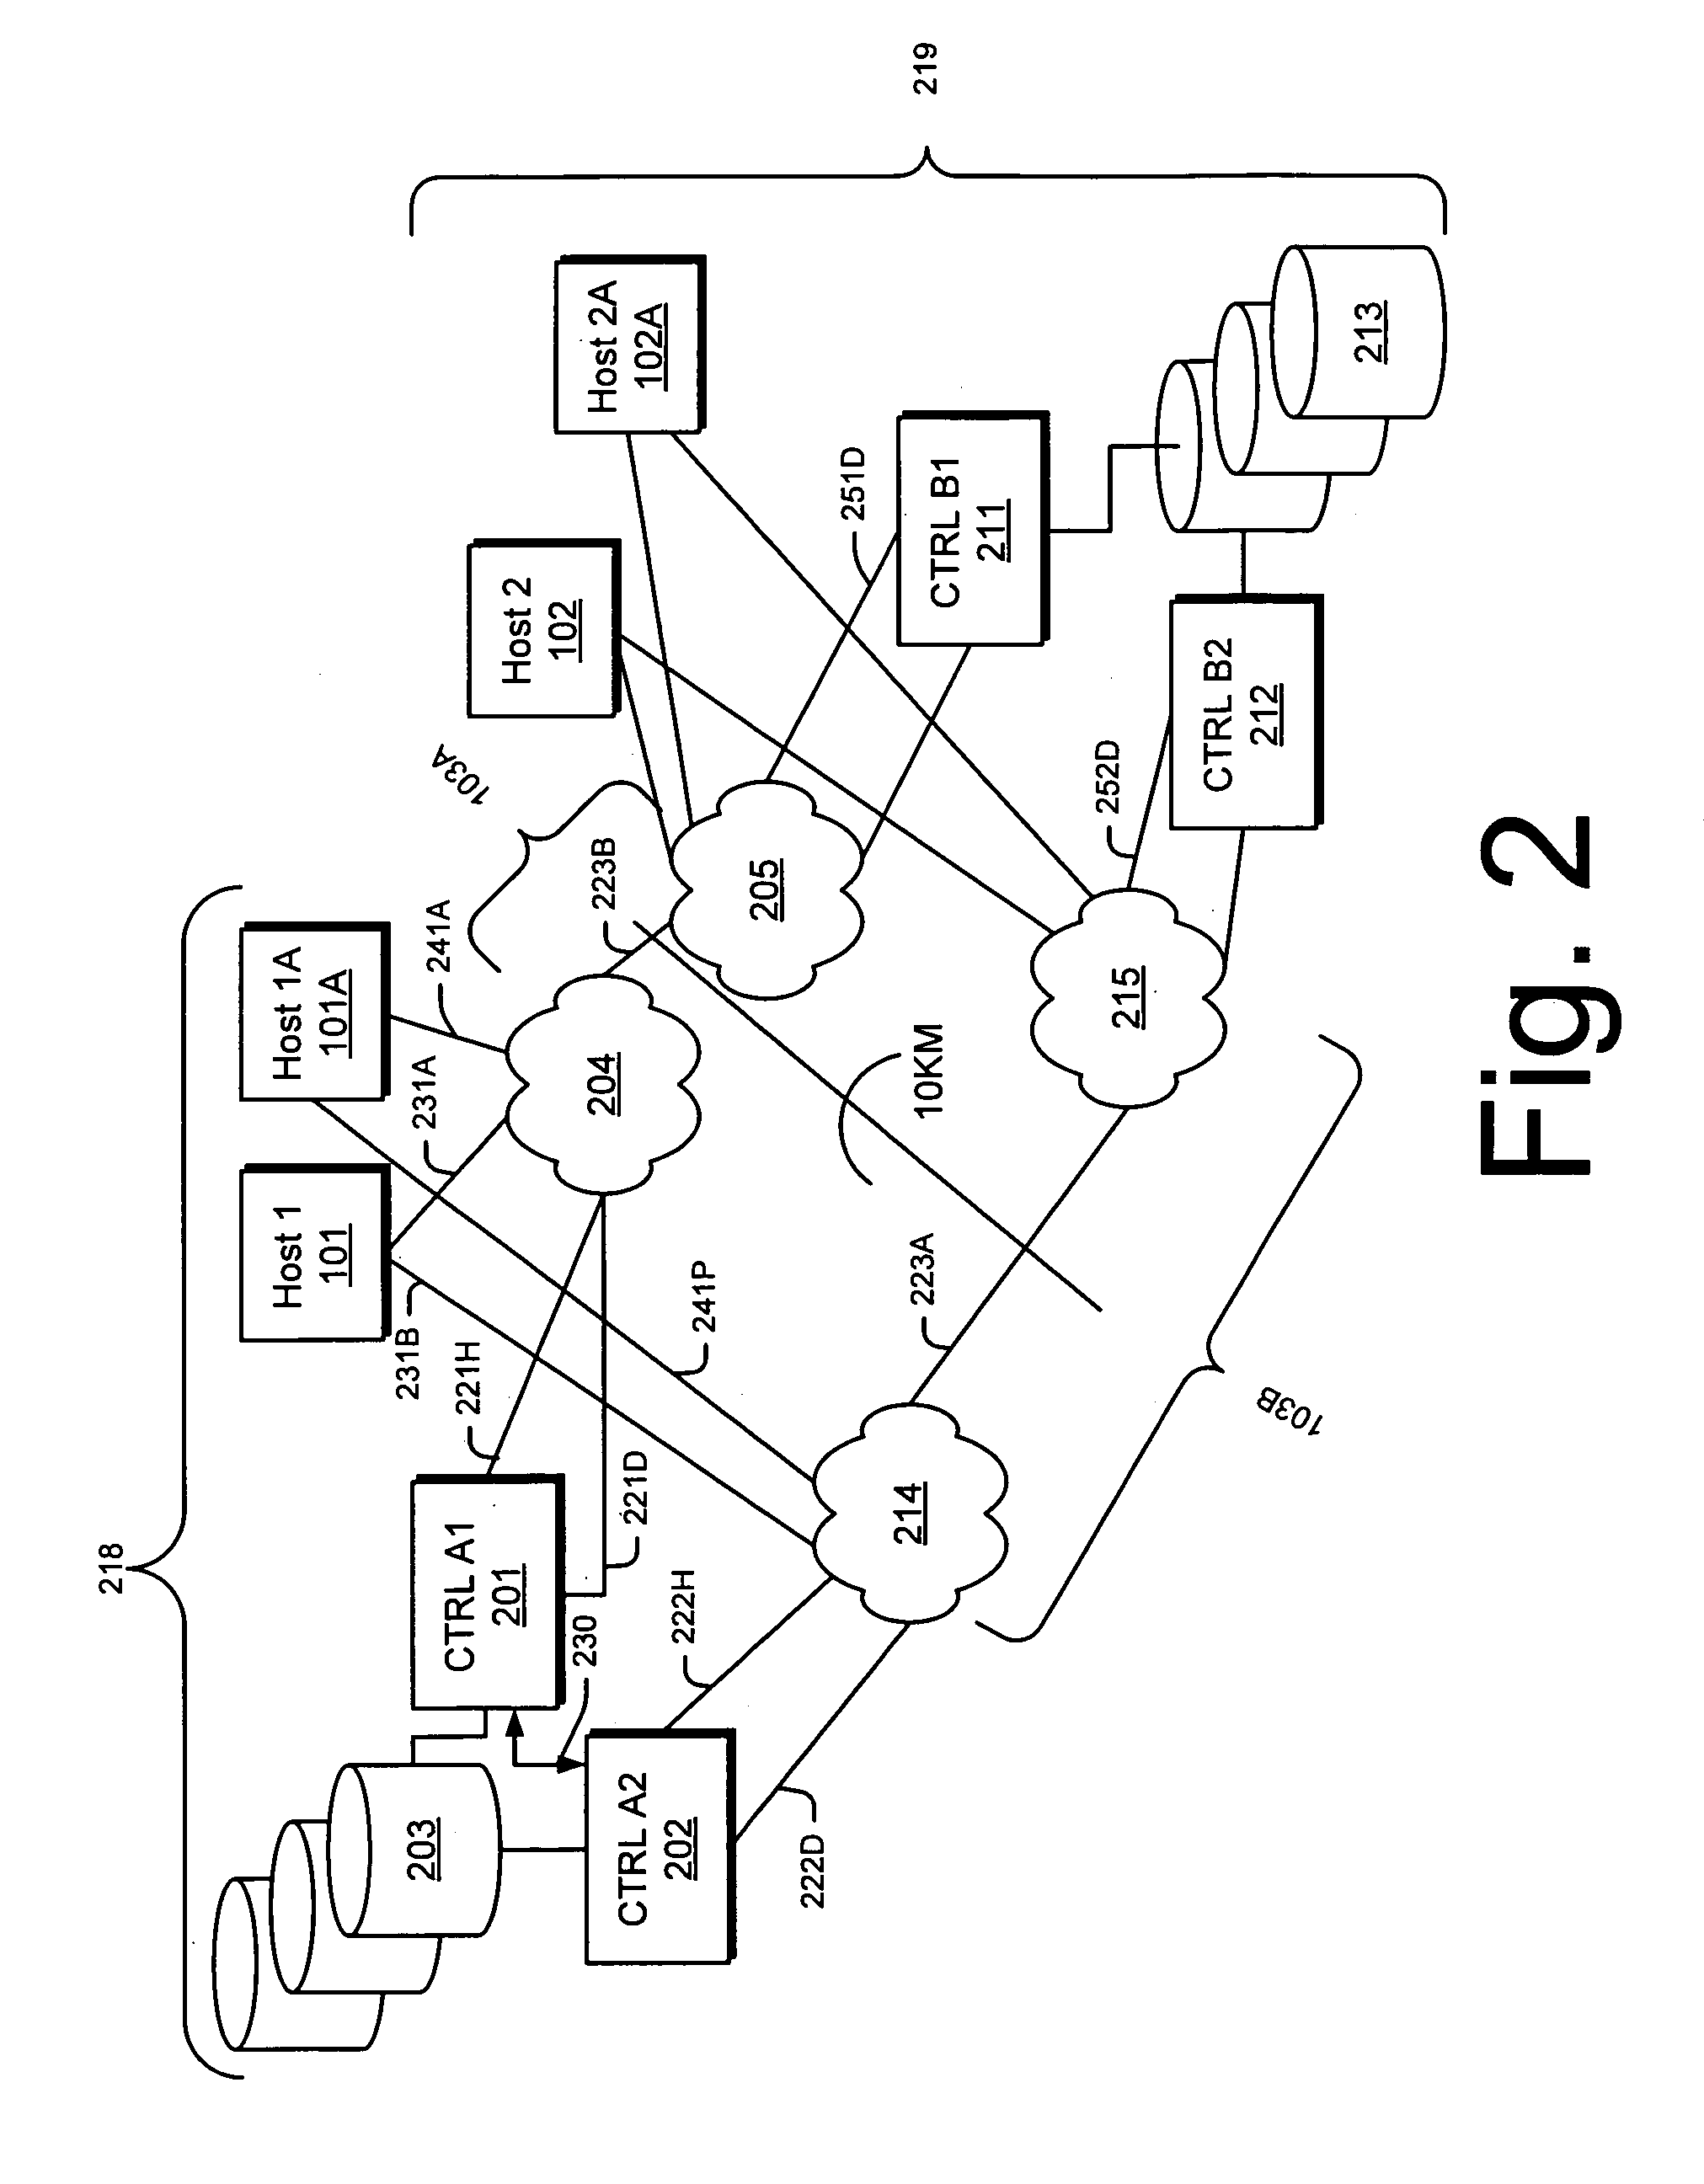 Method for transaction log failover merging during asynchronous operations in a data storage network